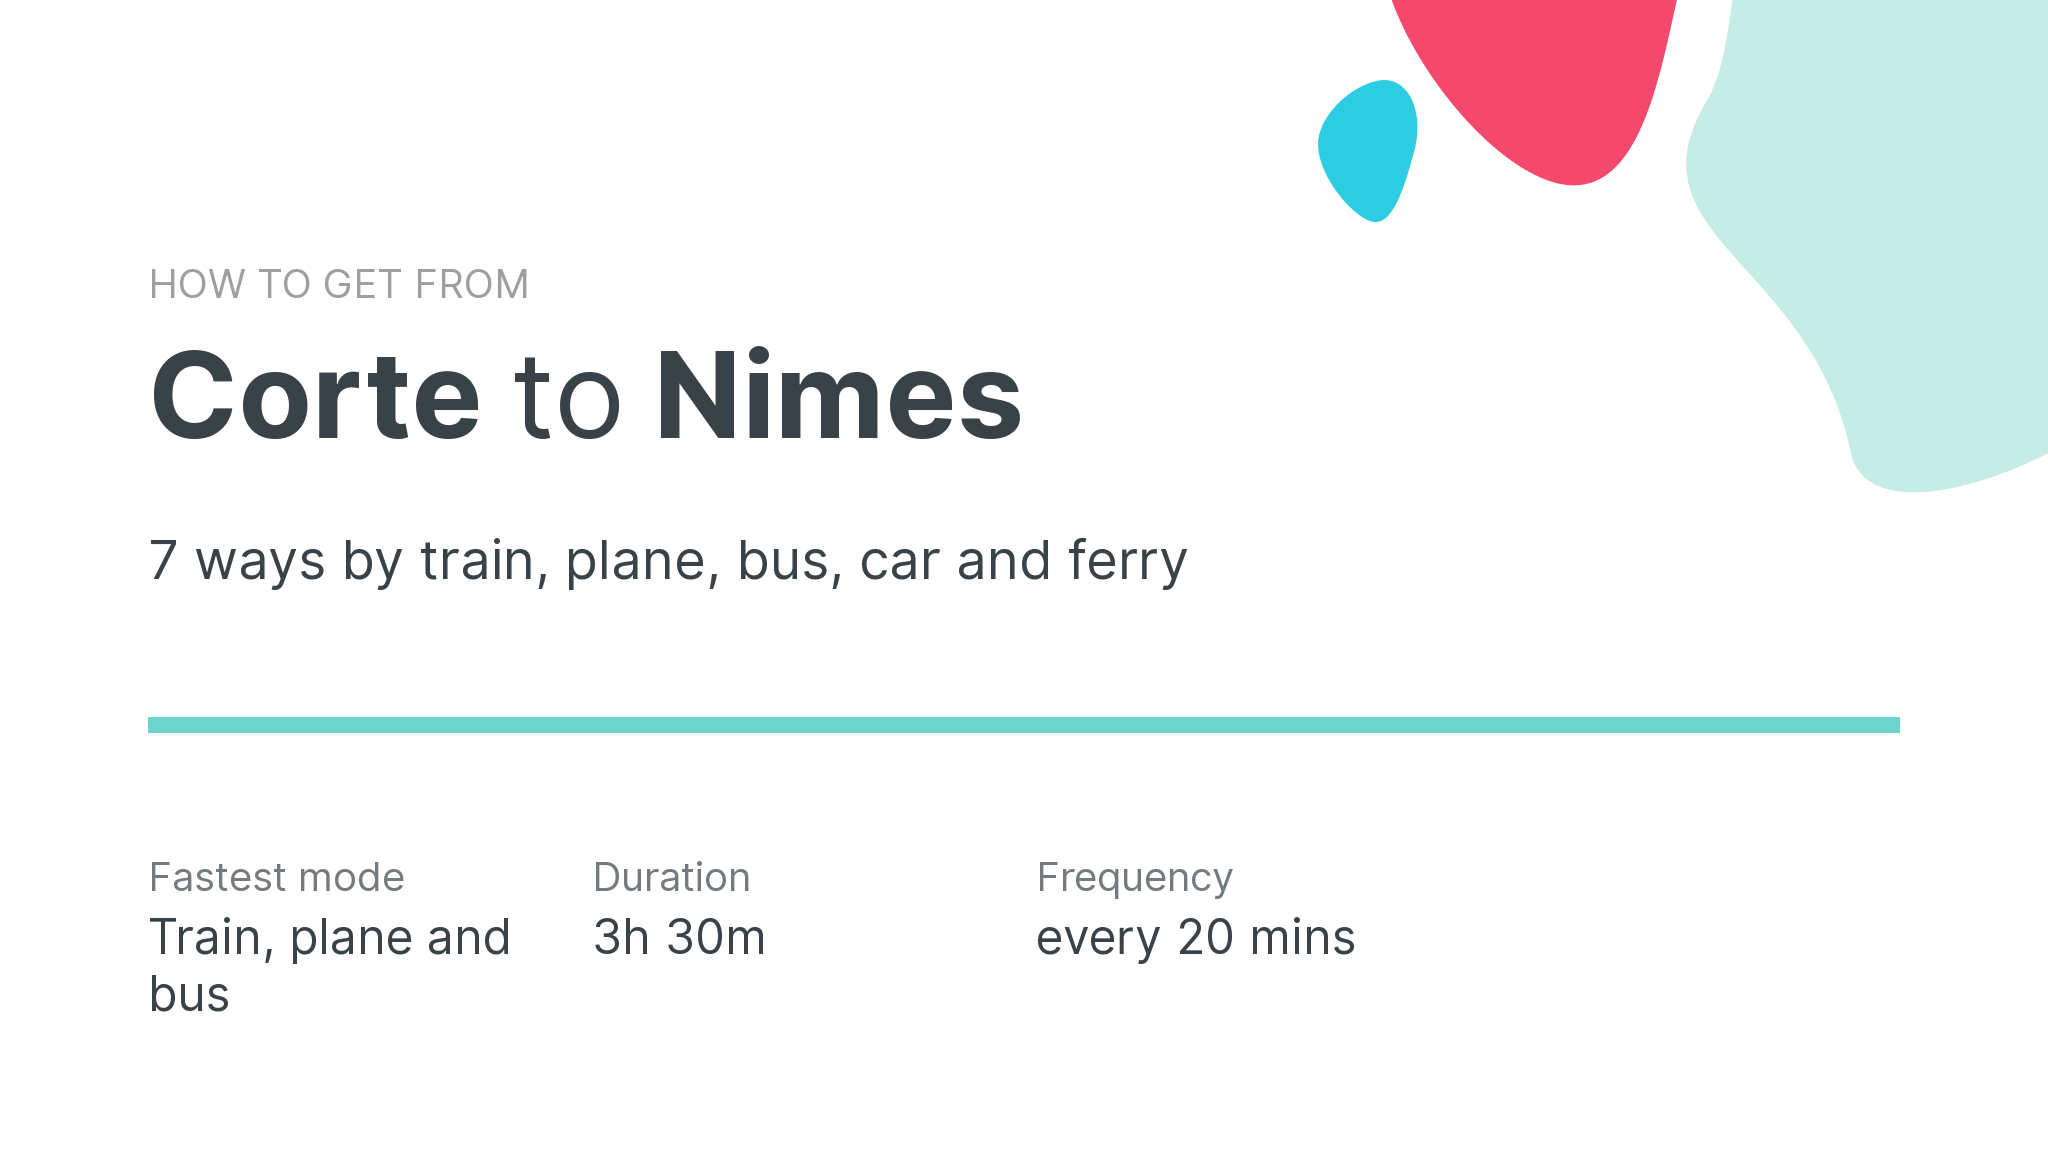 How do I get from Corte to Nimes